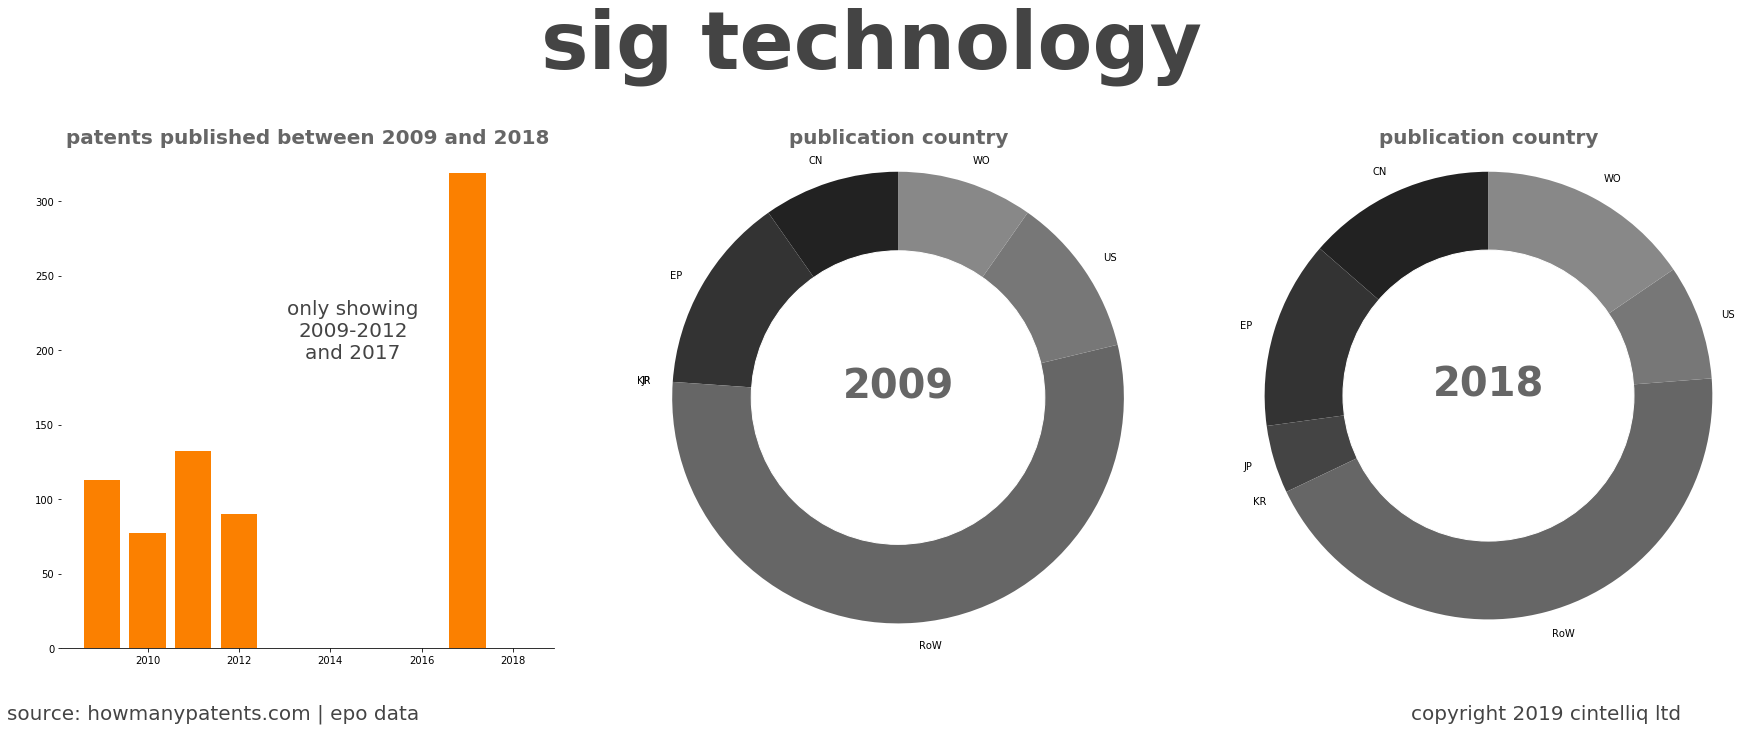 summary of patents for Sig Technology